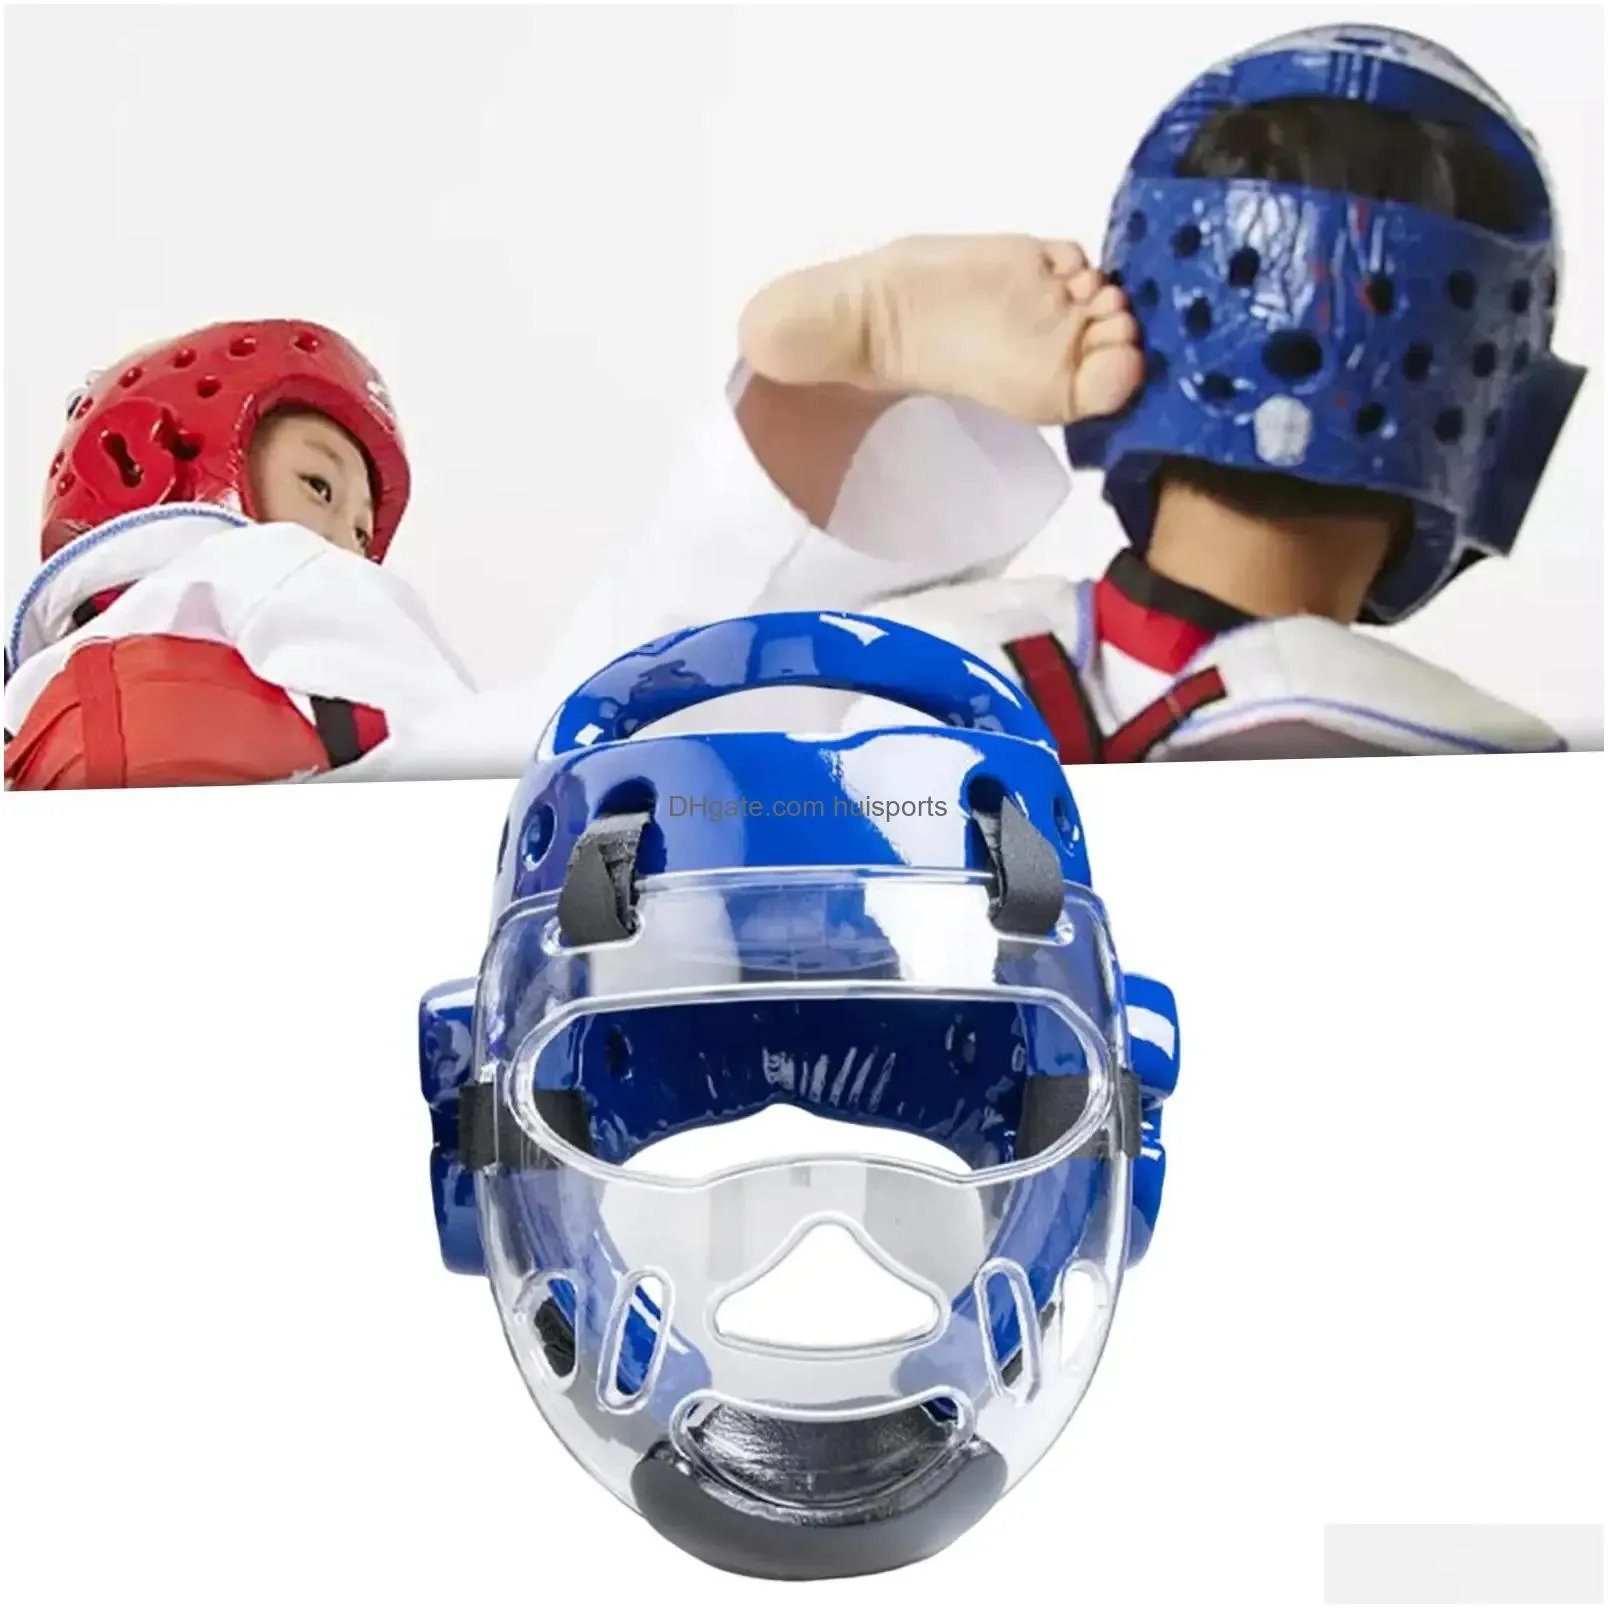 products kickboxing headgear with a removable face shield ventilated durable for taekwondo